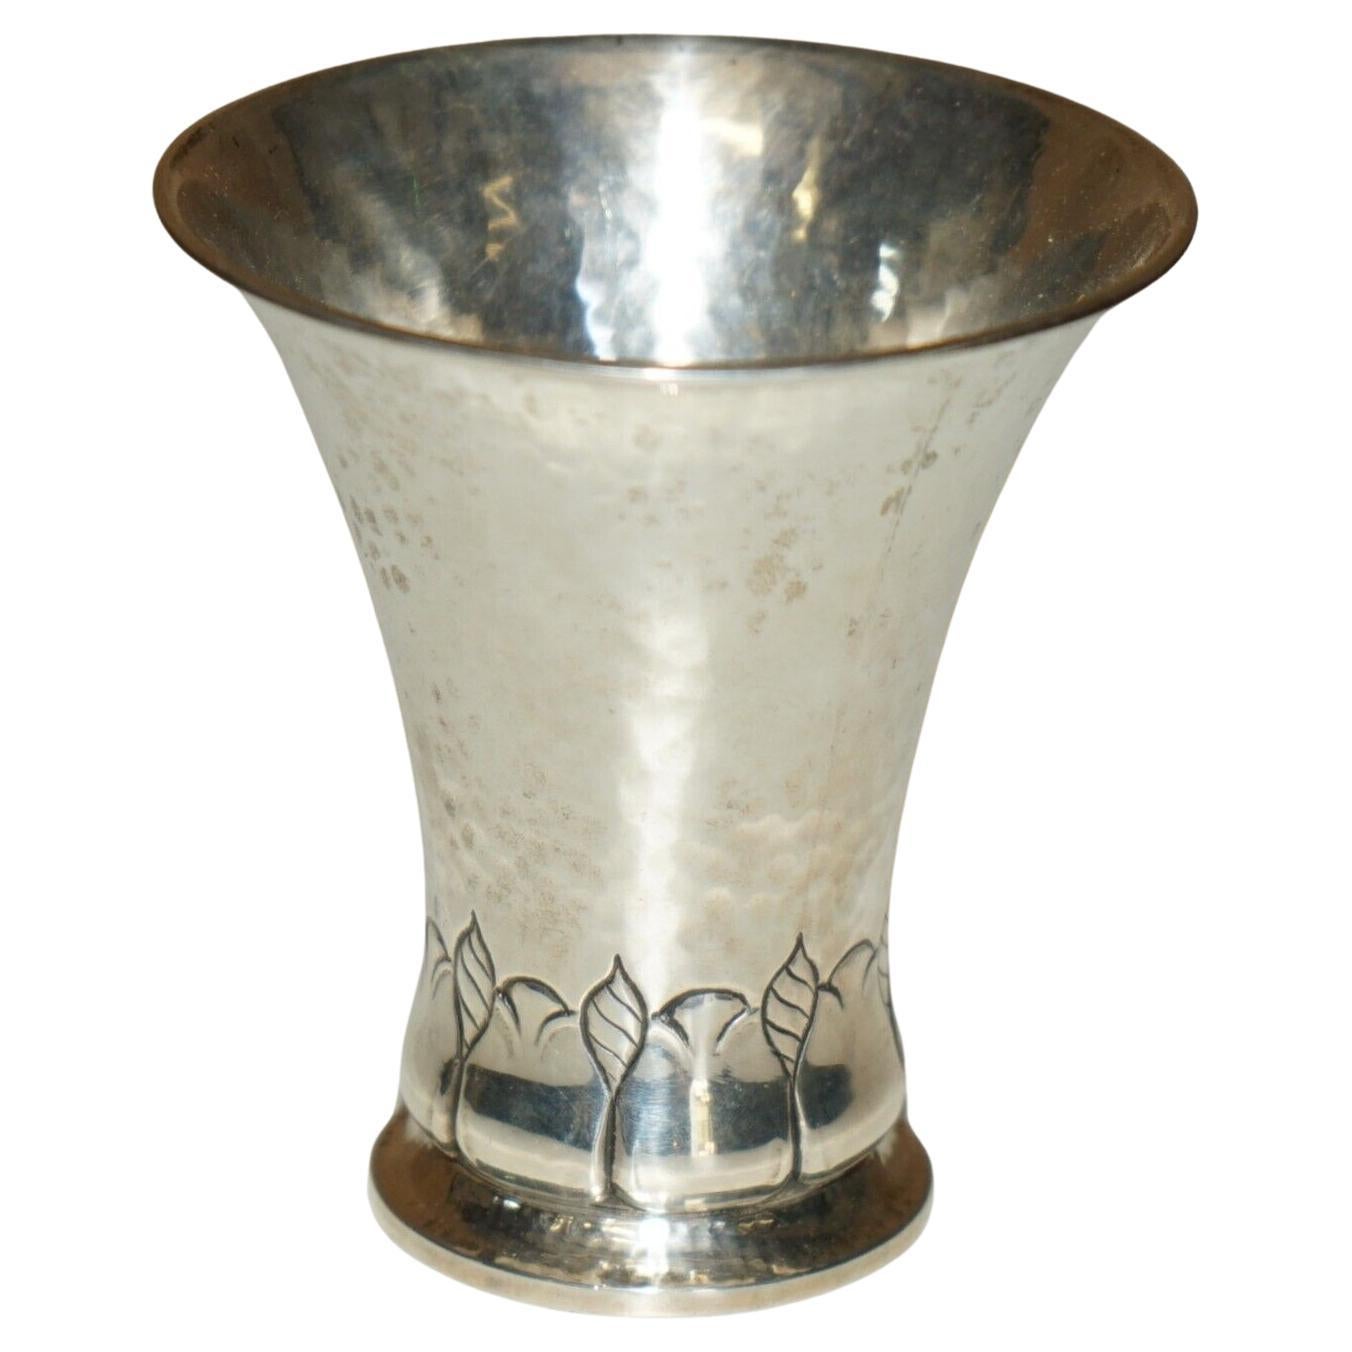 1913-1927 DATED HAND HAMMERED STERLING SiLVER ART NOUVEAU LIBERTY'S STYLE VASE For Sale